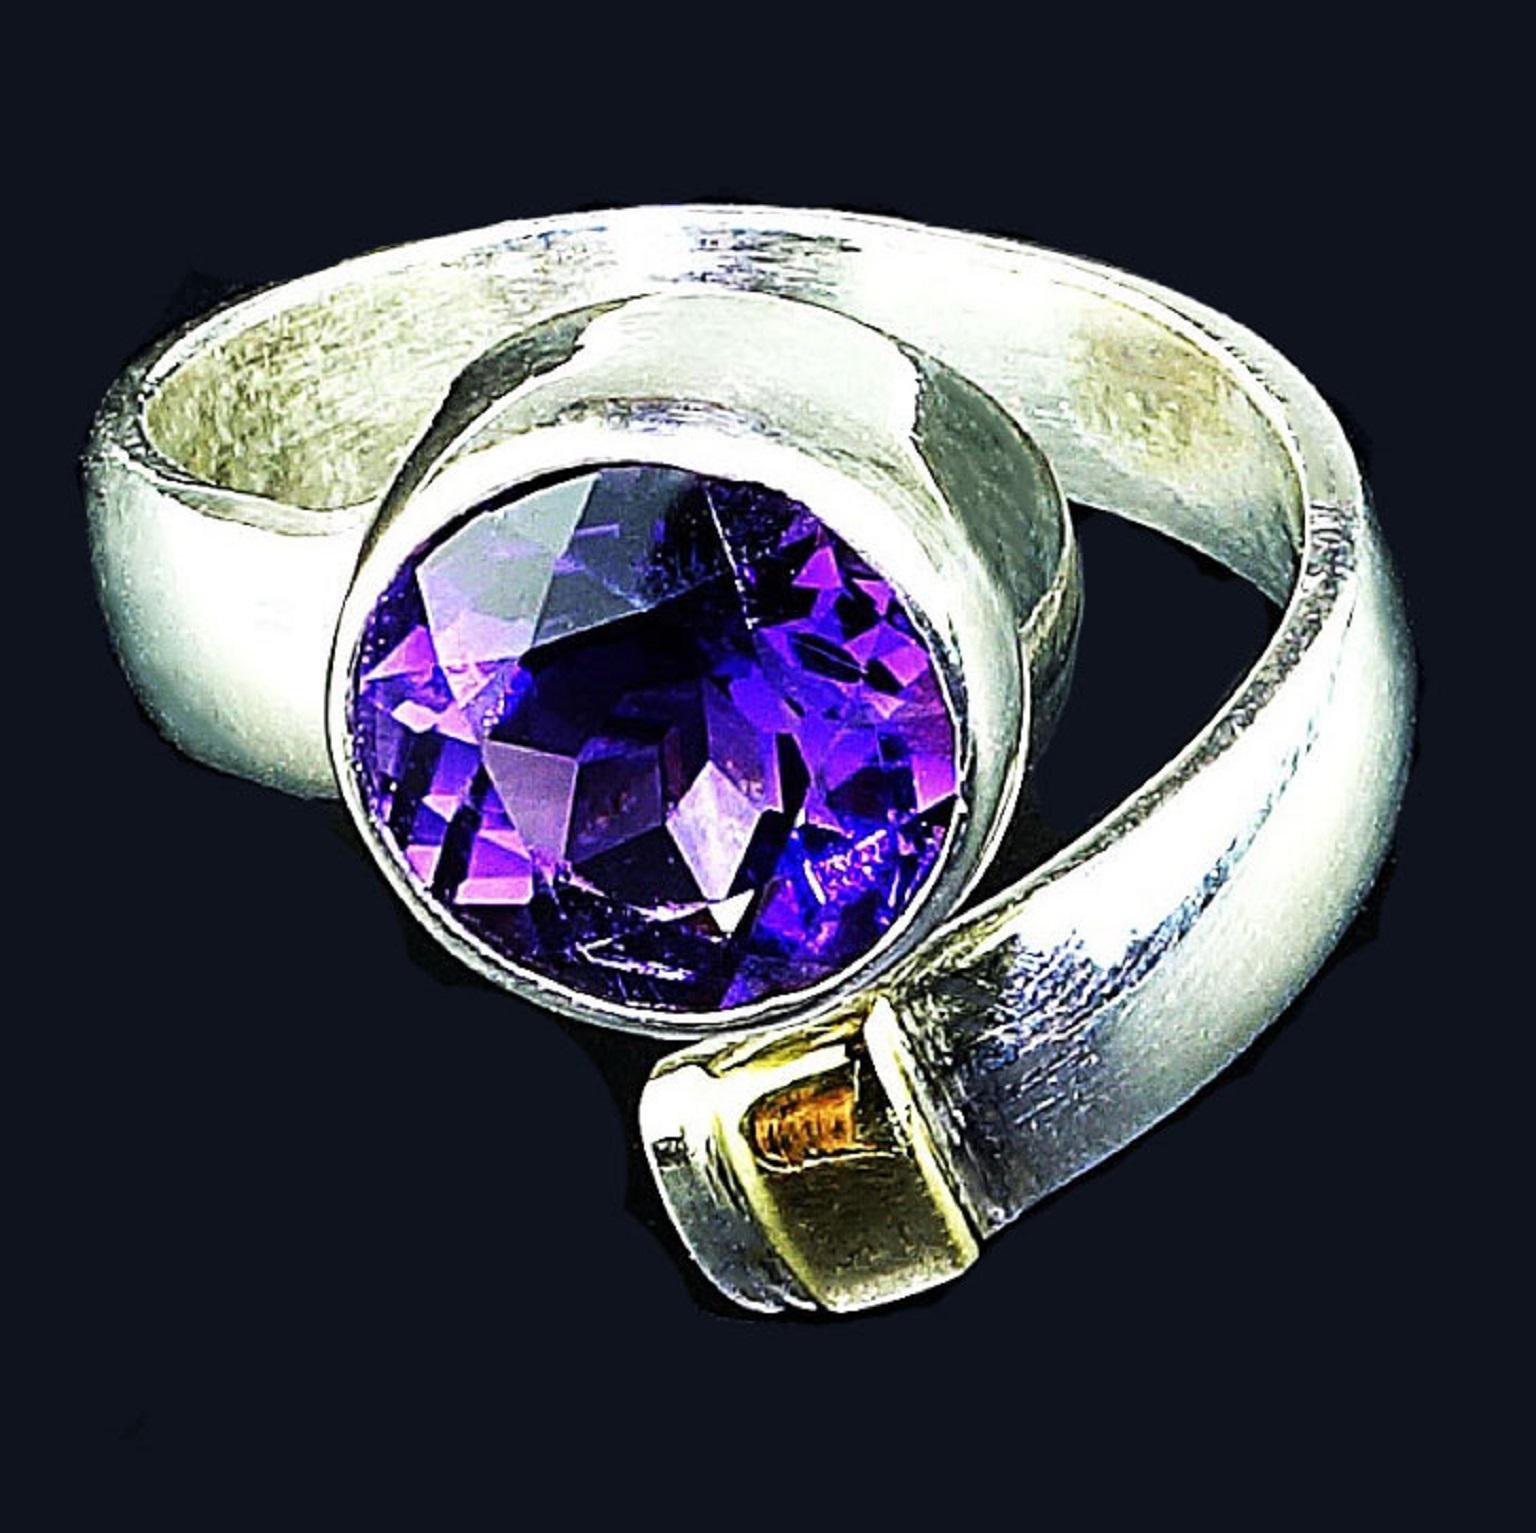 Artisan AJD Crossover Amethyst and Sterling Silver Ring with 14K gold accent  